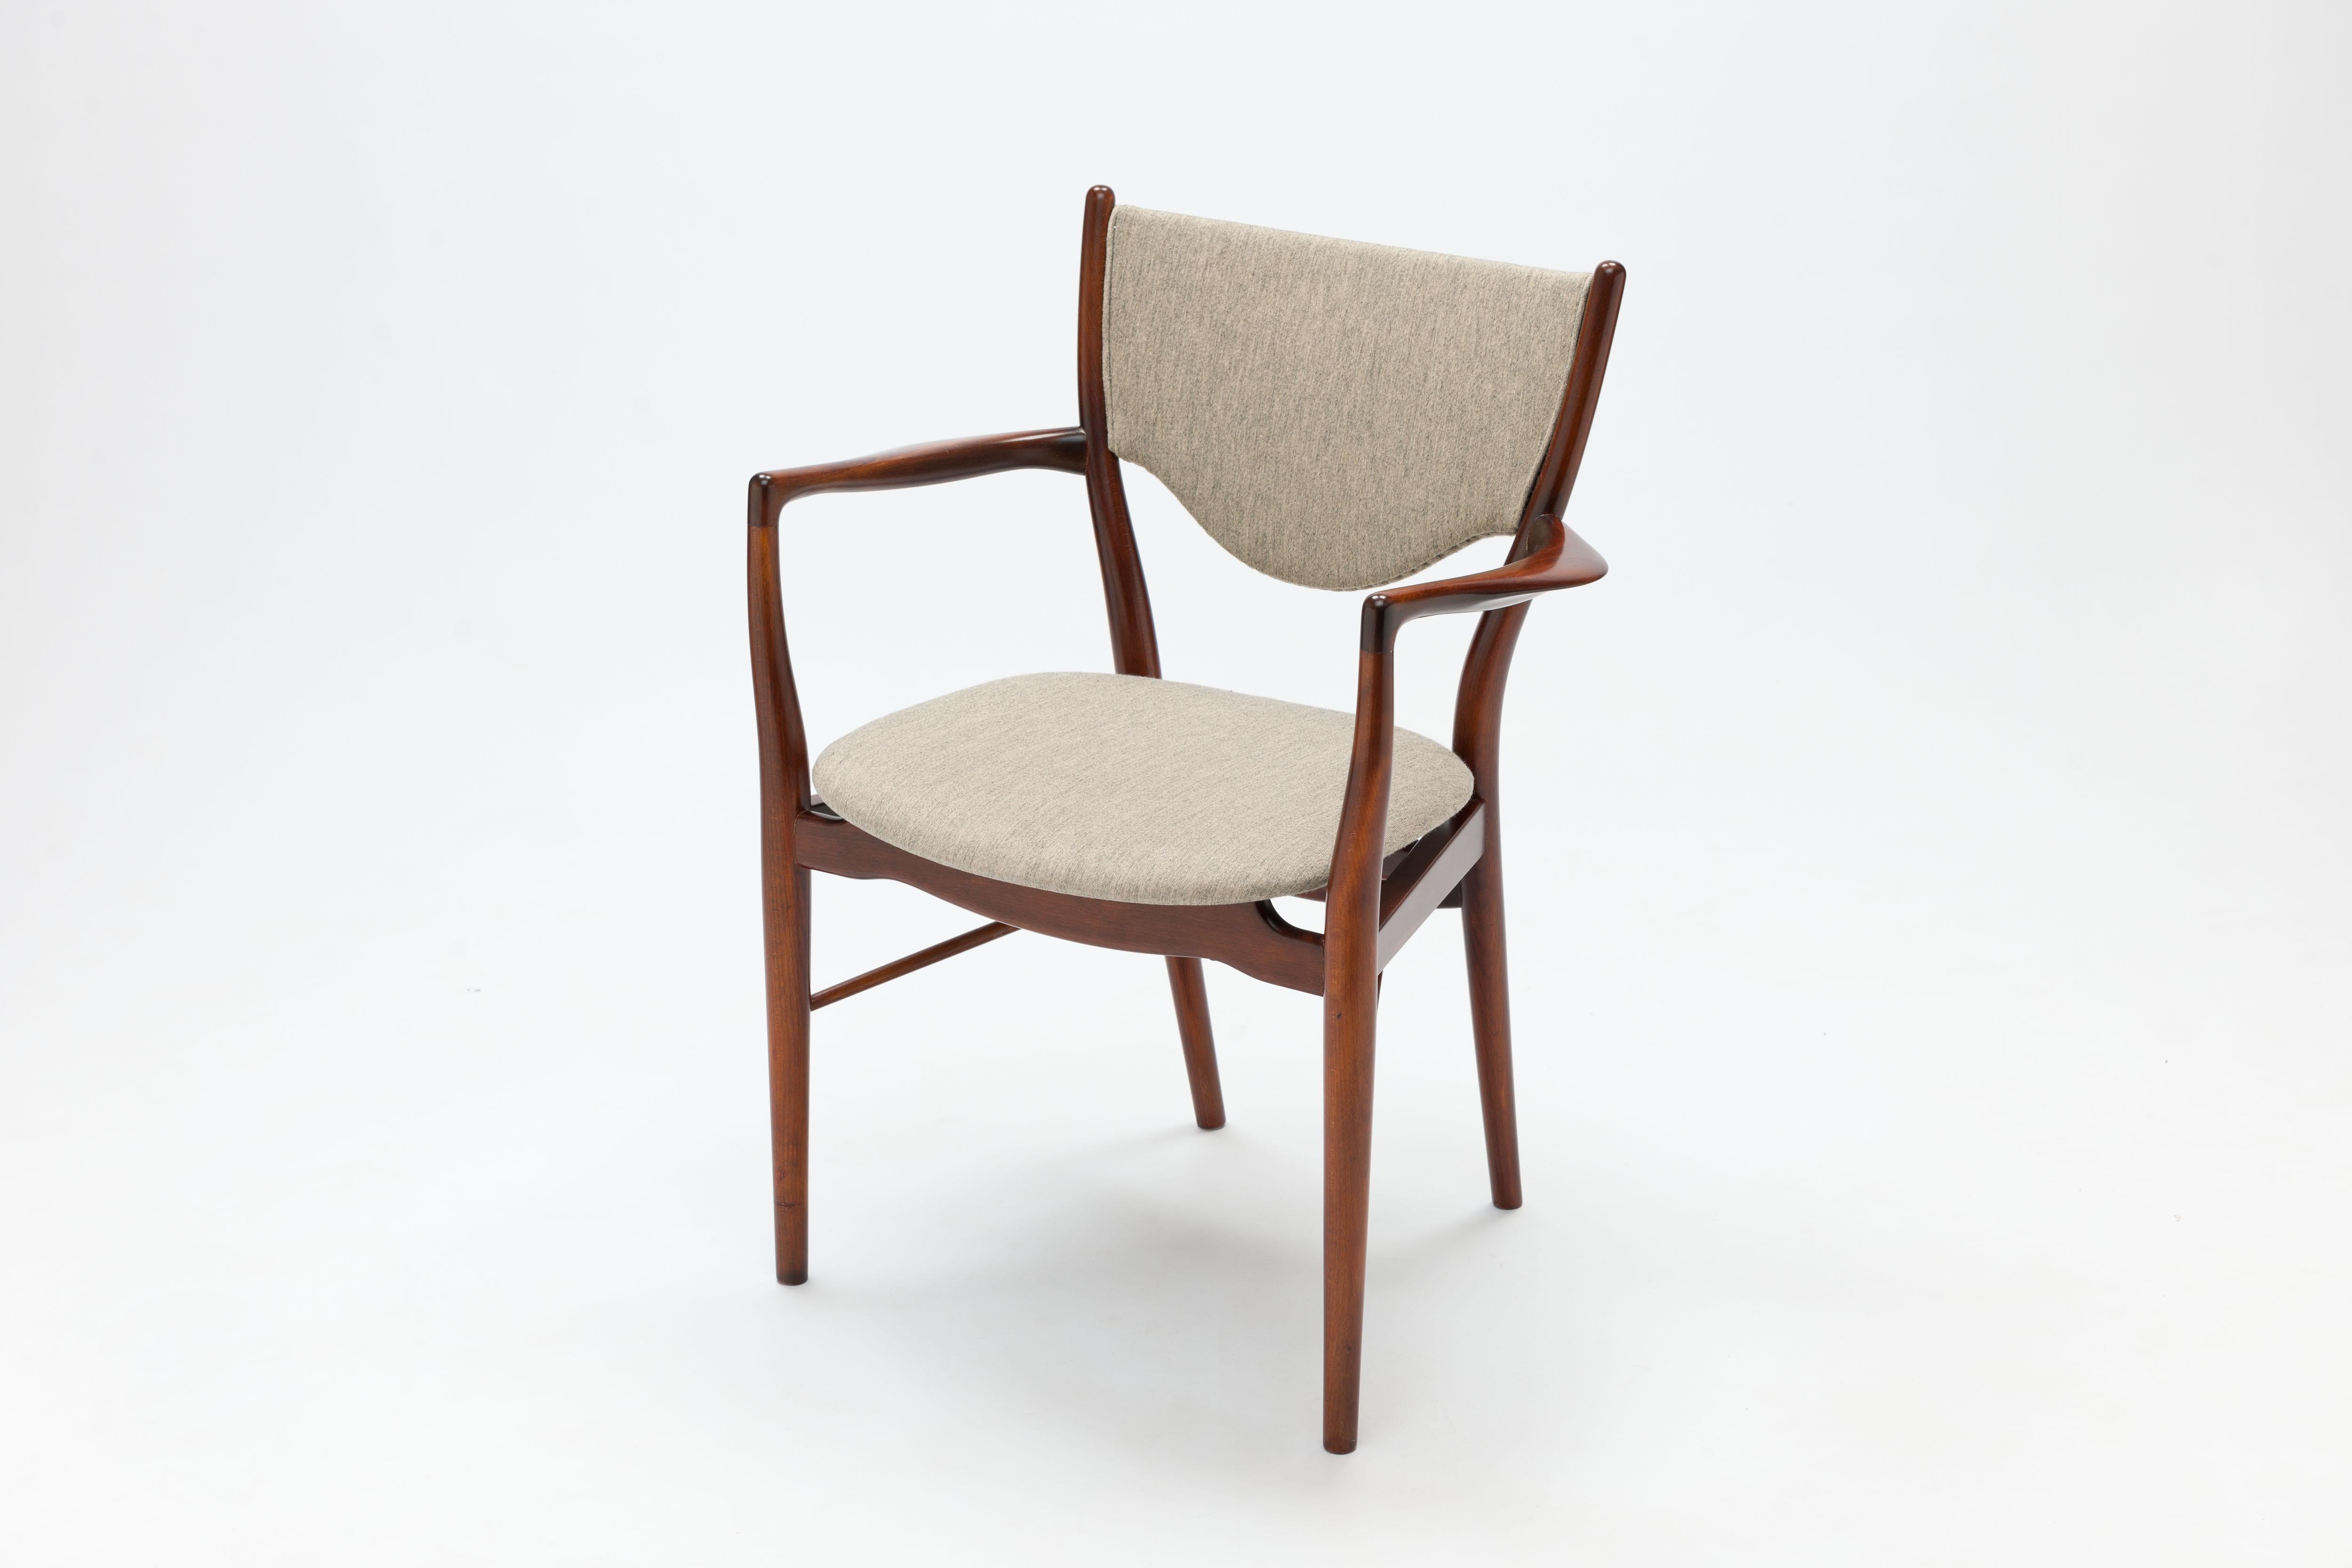 A rare and early example of armchair model BO-46 by Finn Juhl for Bovirke Denmark. Arm chair model BO-46 was designed by Finn Juhl in 1953 based upon his earlier designed chair model NV46 by Niels Vodder. 

Frame of stained beech with very good